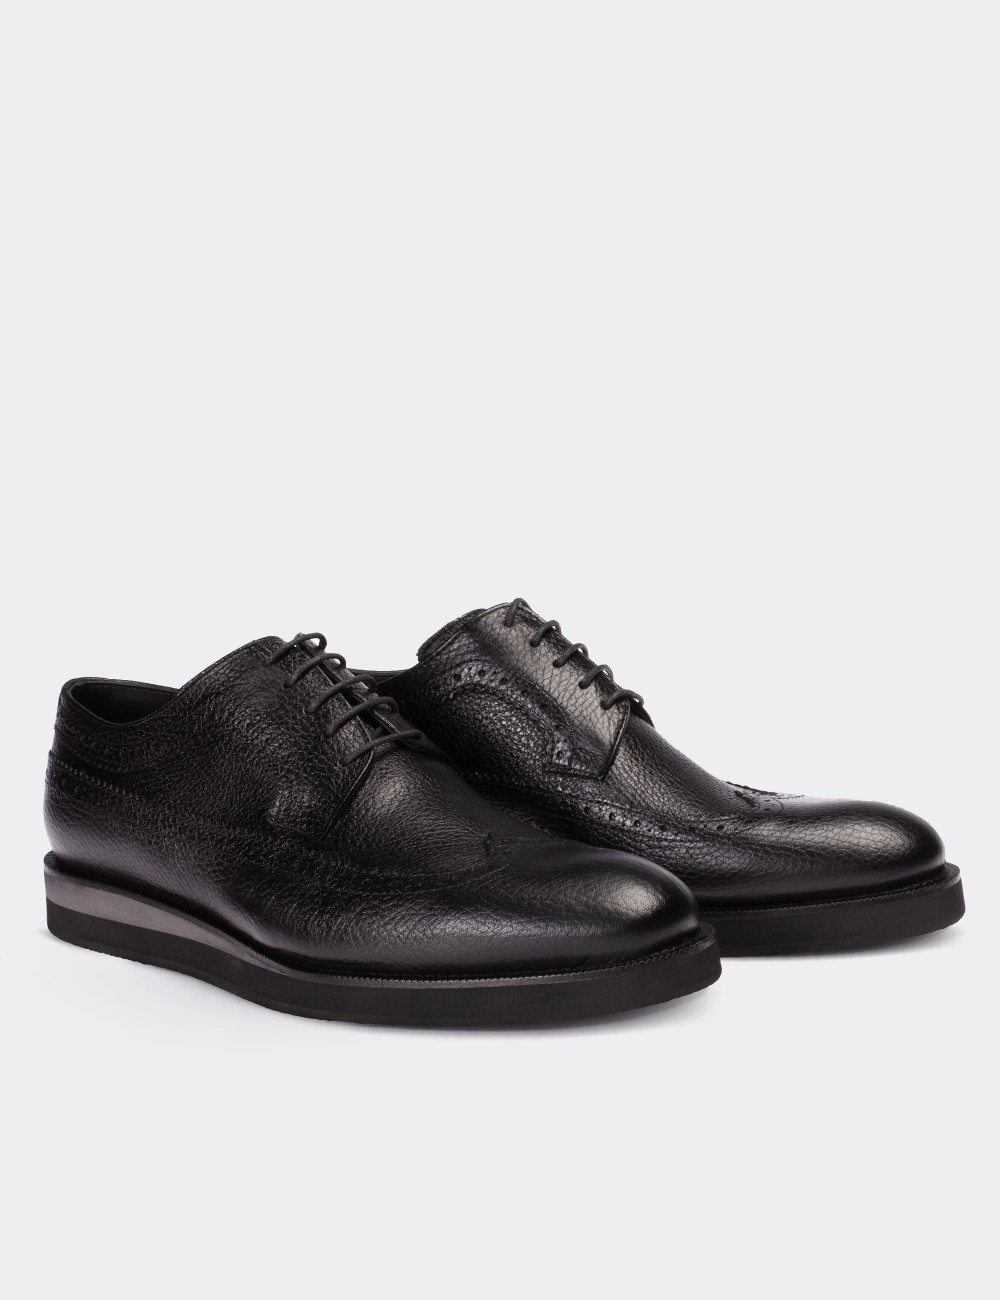 Black  Leather Lace-up Shoes - 01293MSYHE35